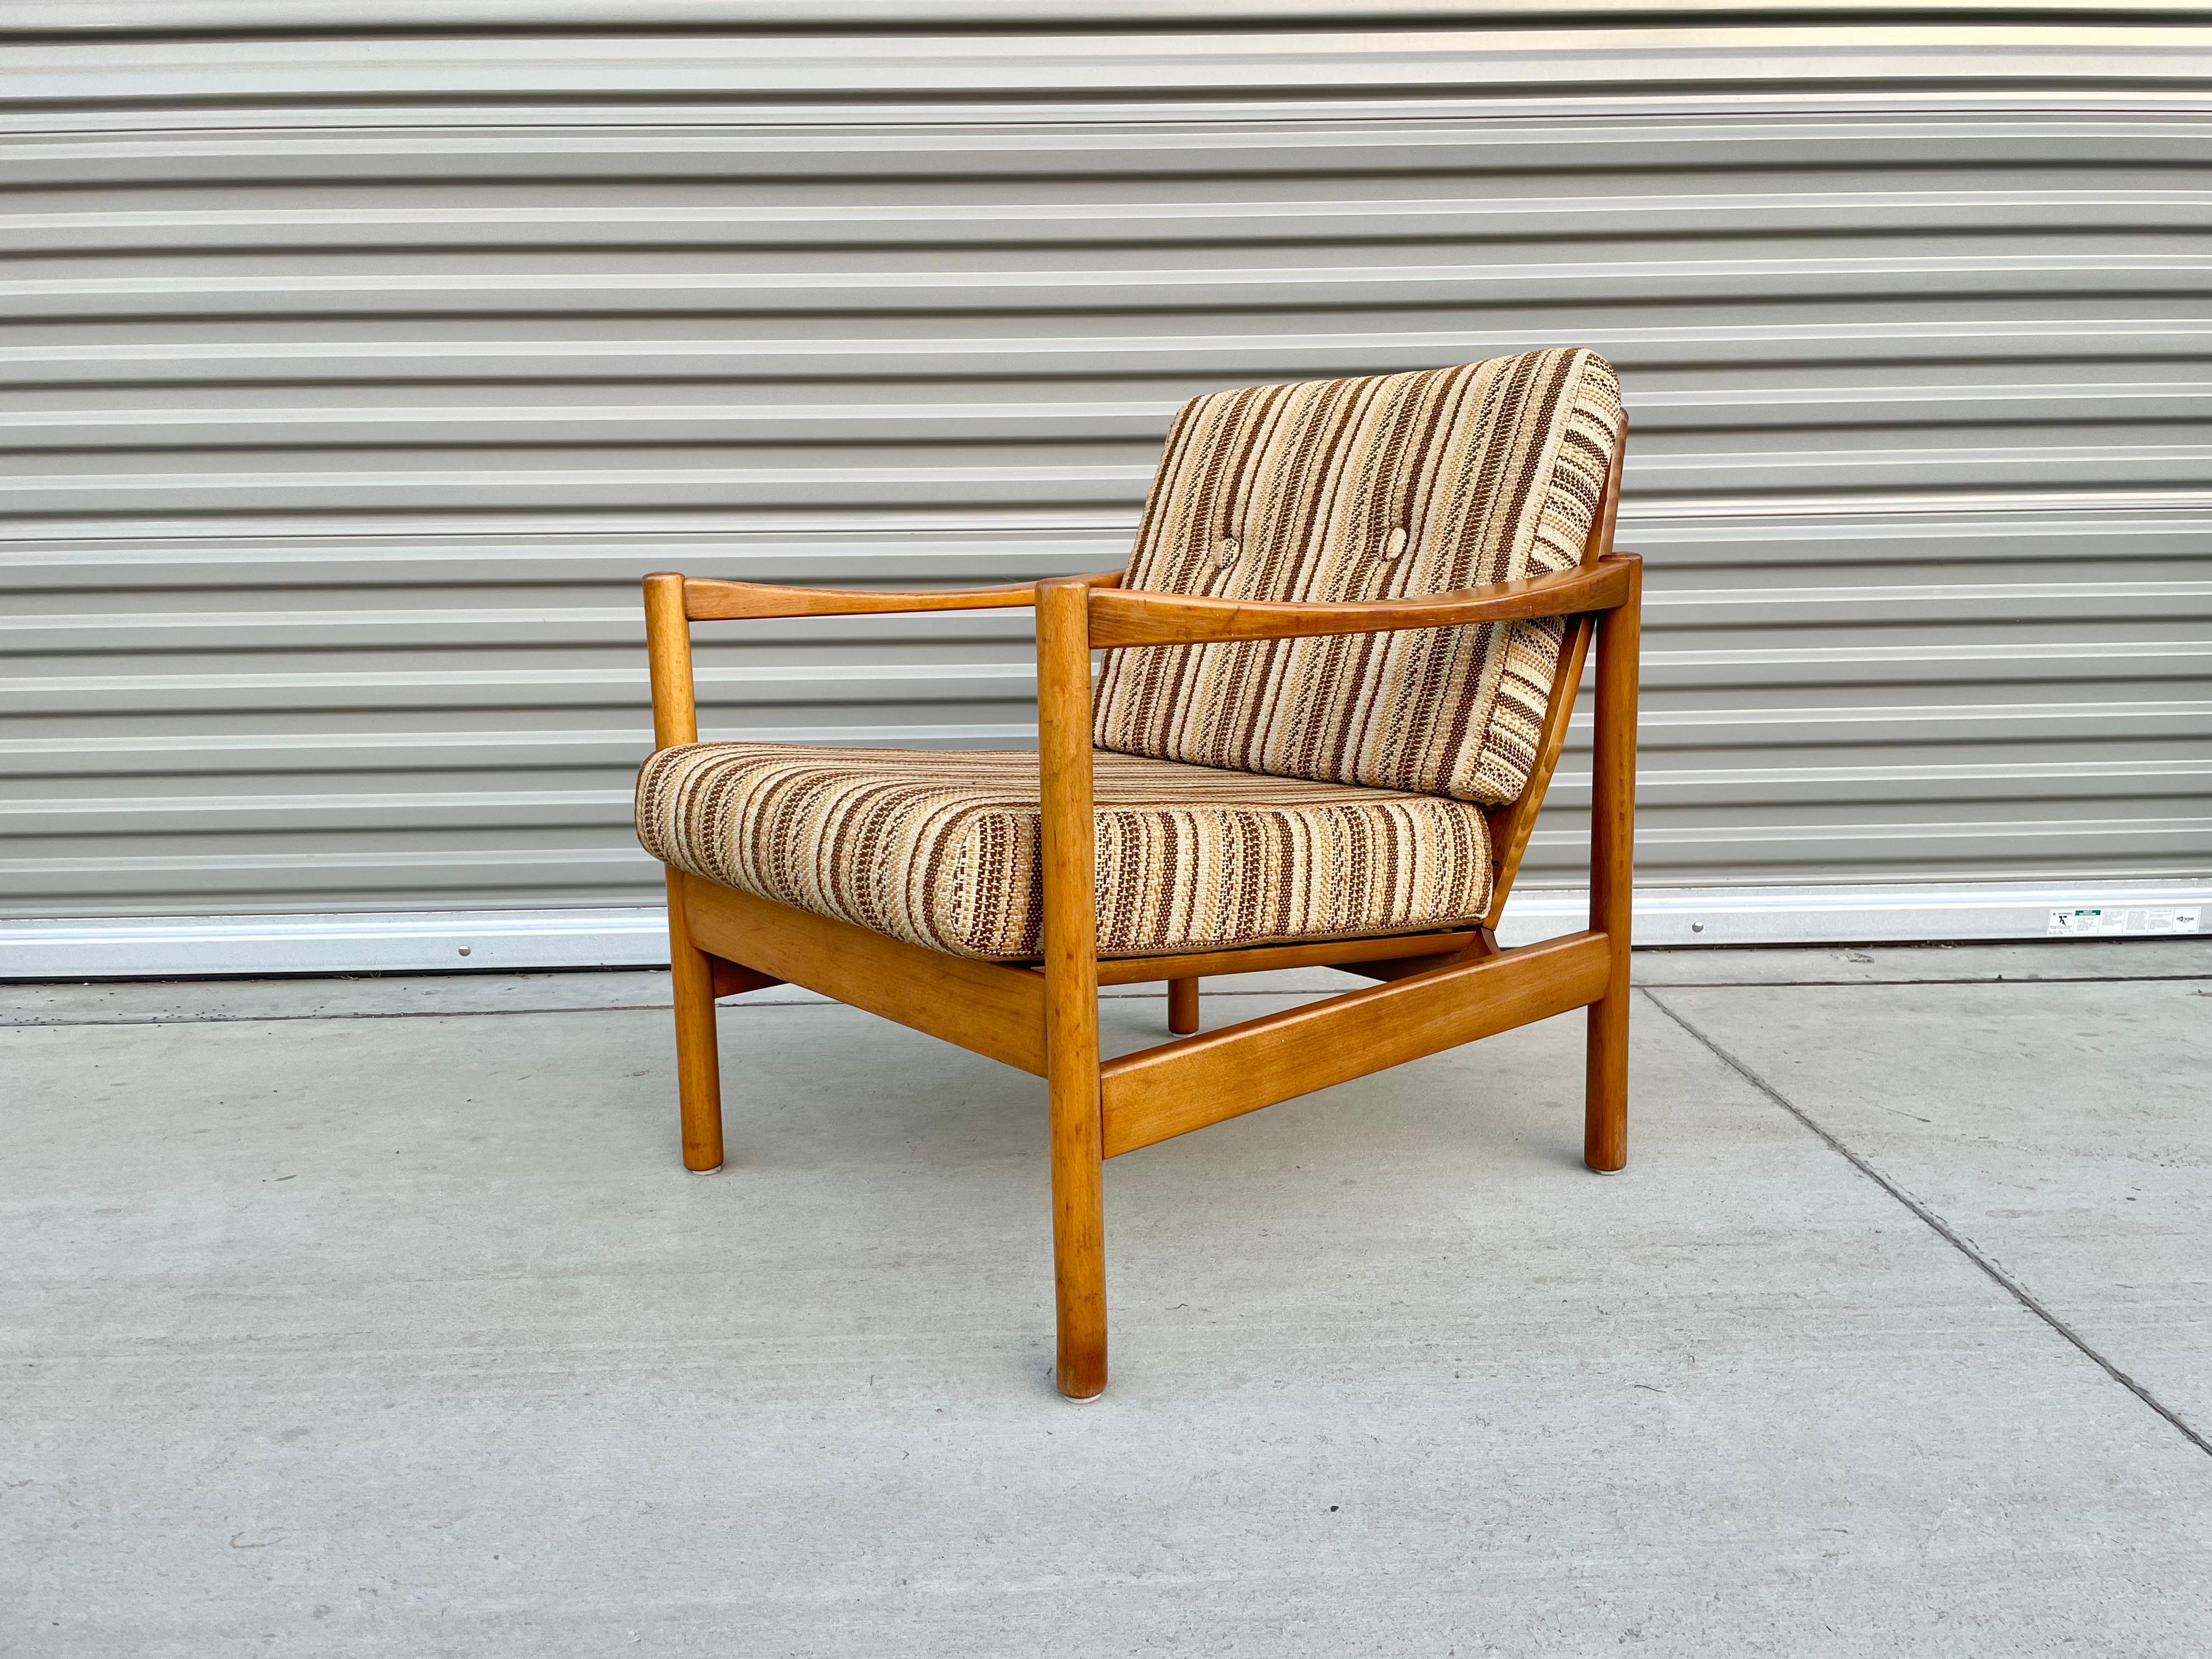 Beautiful midcentury teak lounge chair designed and manufactured in Denmark, circa 1960s. This vintage lounge chair features a unique curve armrest giving it a great distinctive design for its era. The chair also offers excellent lumbar support